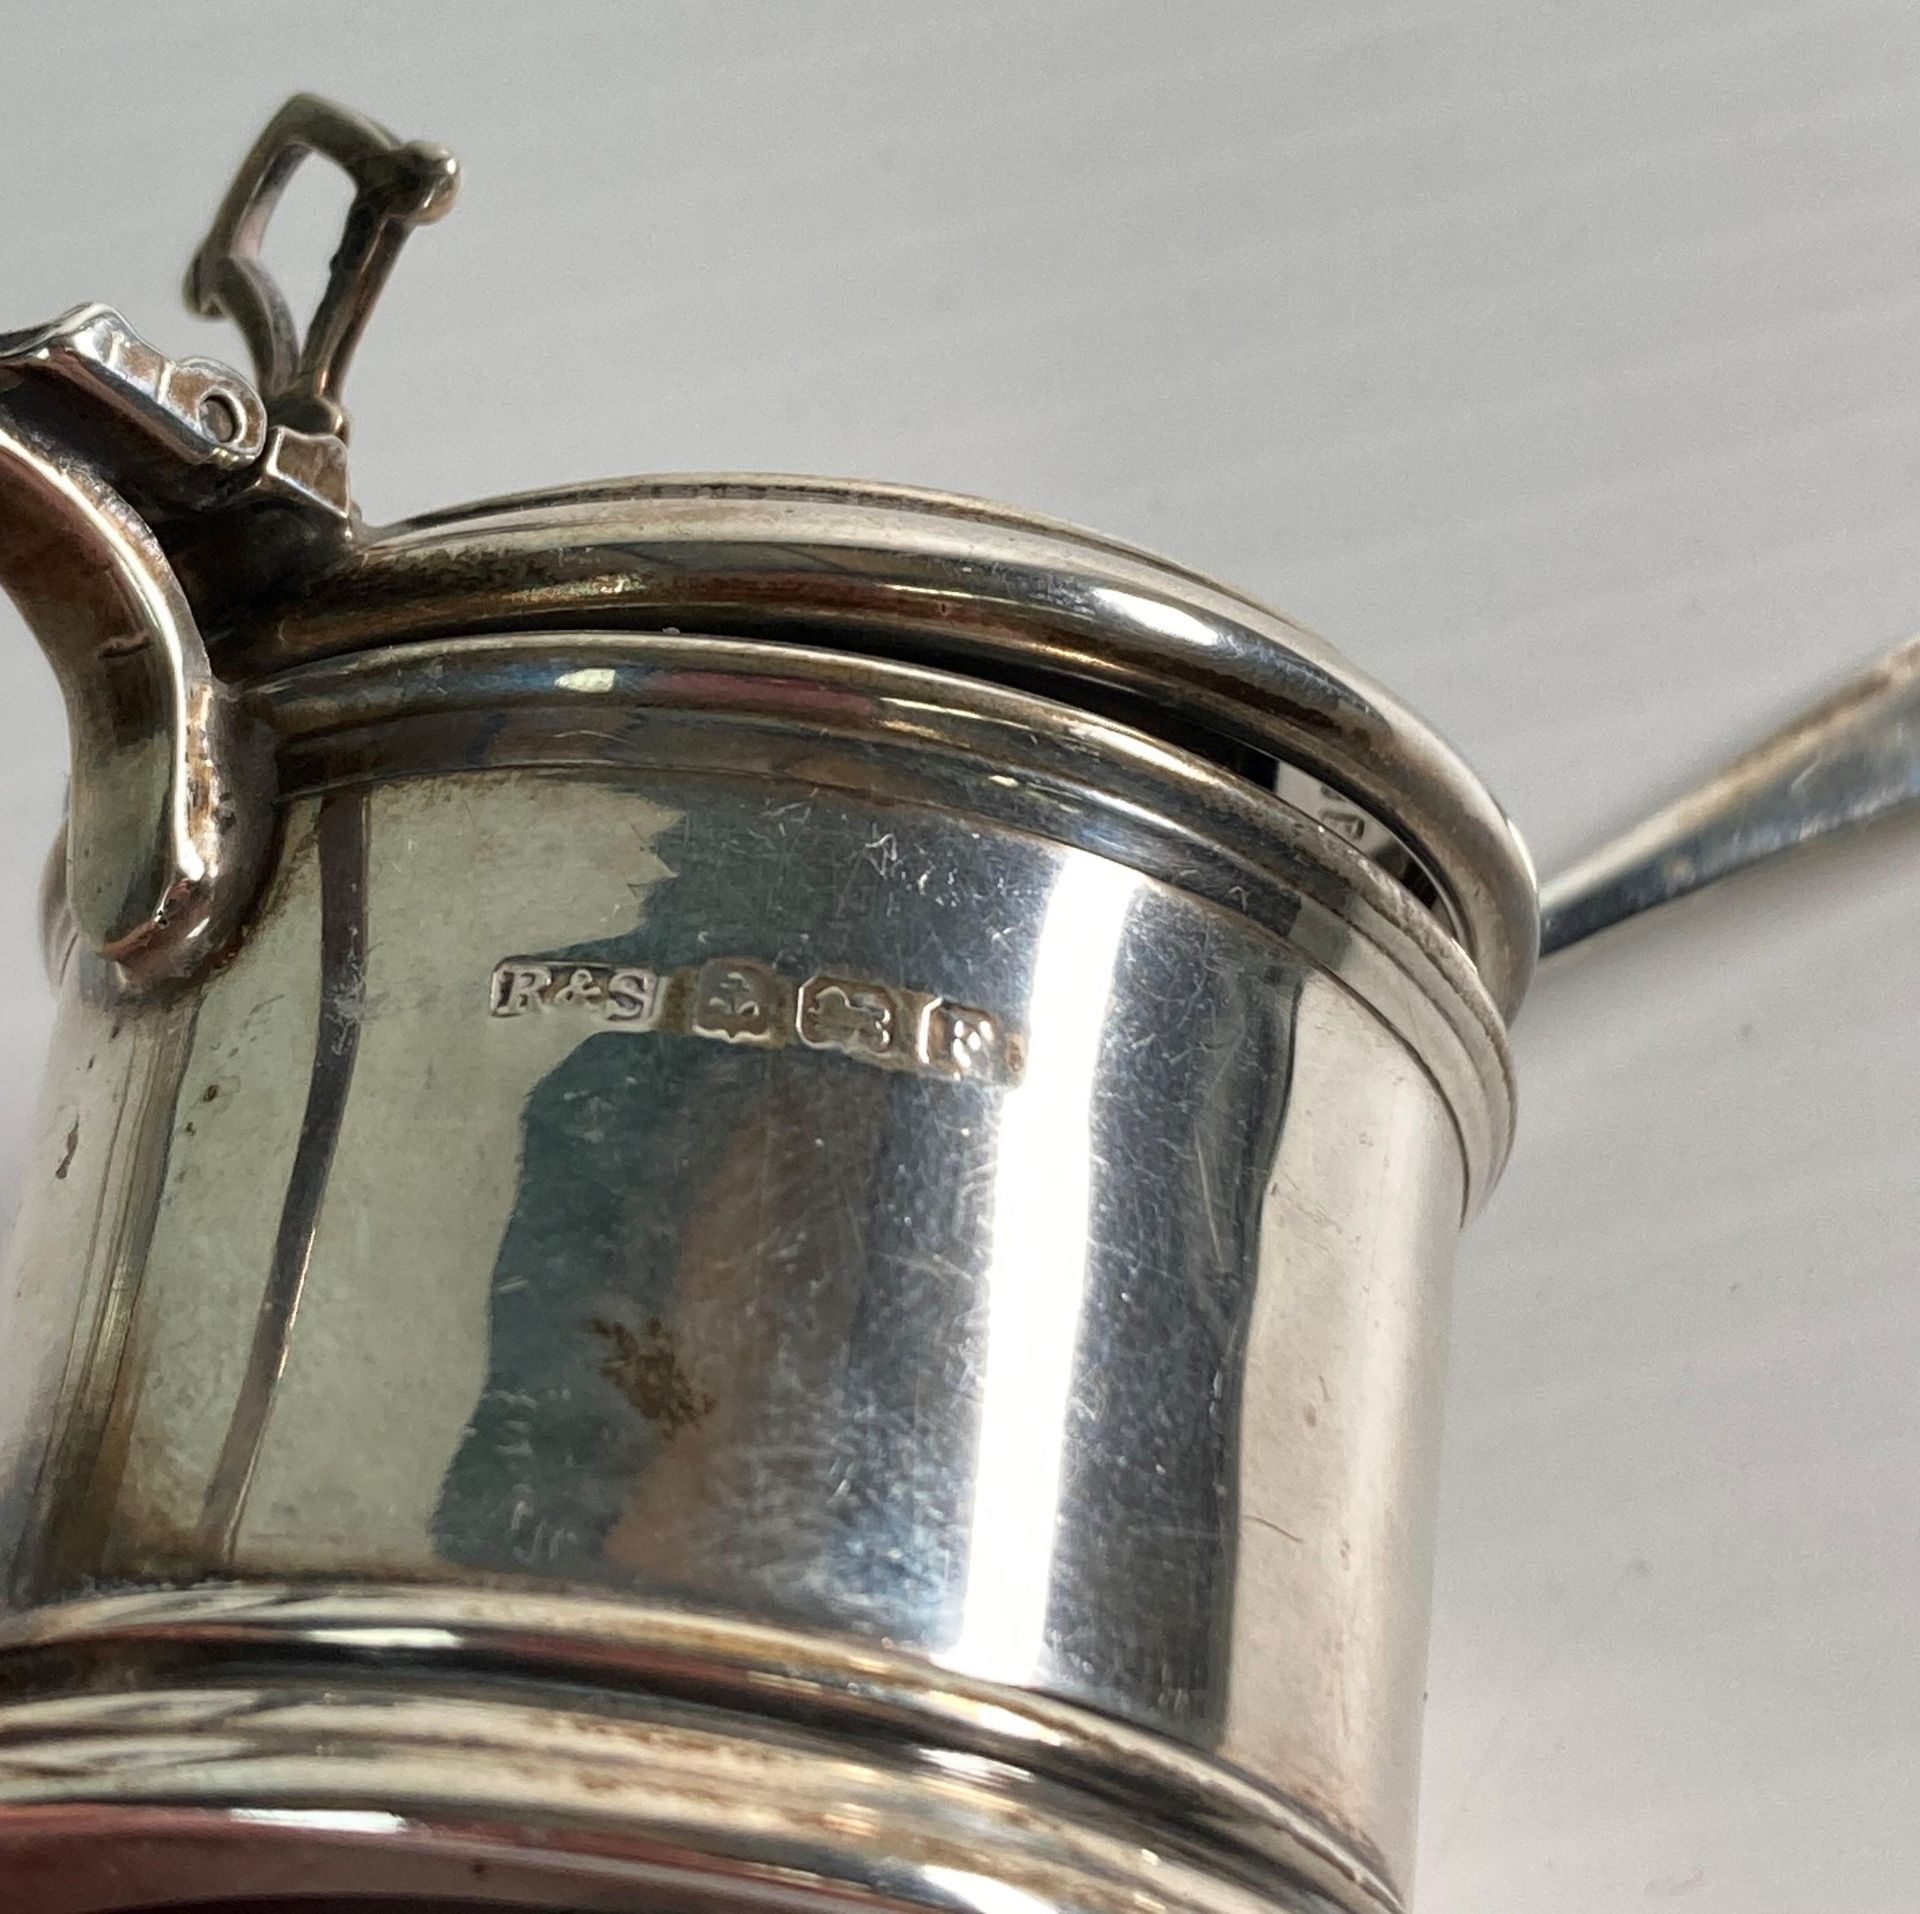 Contents to box - silver (1930, Birmingham) lidded mustard pot with glass liner and spoon, - Image 2 of 3